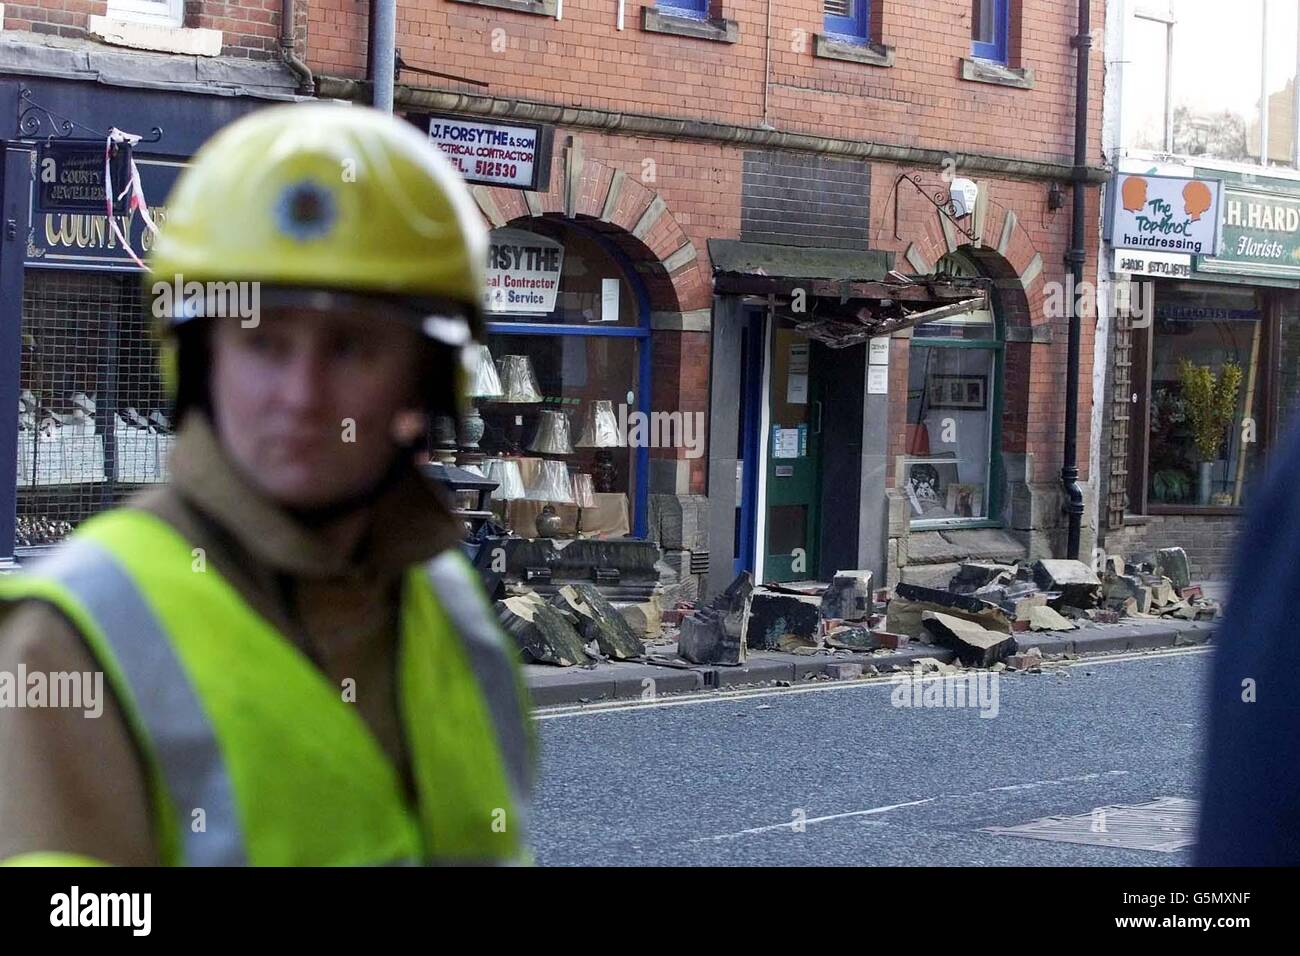 A fireman views the damage caused by high winds in Morpeth High Street, Morpeth, Northumberland. One person was injured when the roof was blown off, sending rubble crashing down onto the street below. * Thousands of homes were without electricity as severe gales up to 100mph continued to batter parts of Britain. The misery of the heavy rain and strong winds, which have been the worst seen in recent years, was expected to ease later. Stock Photo